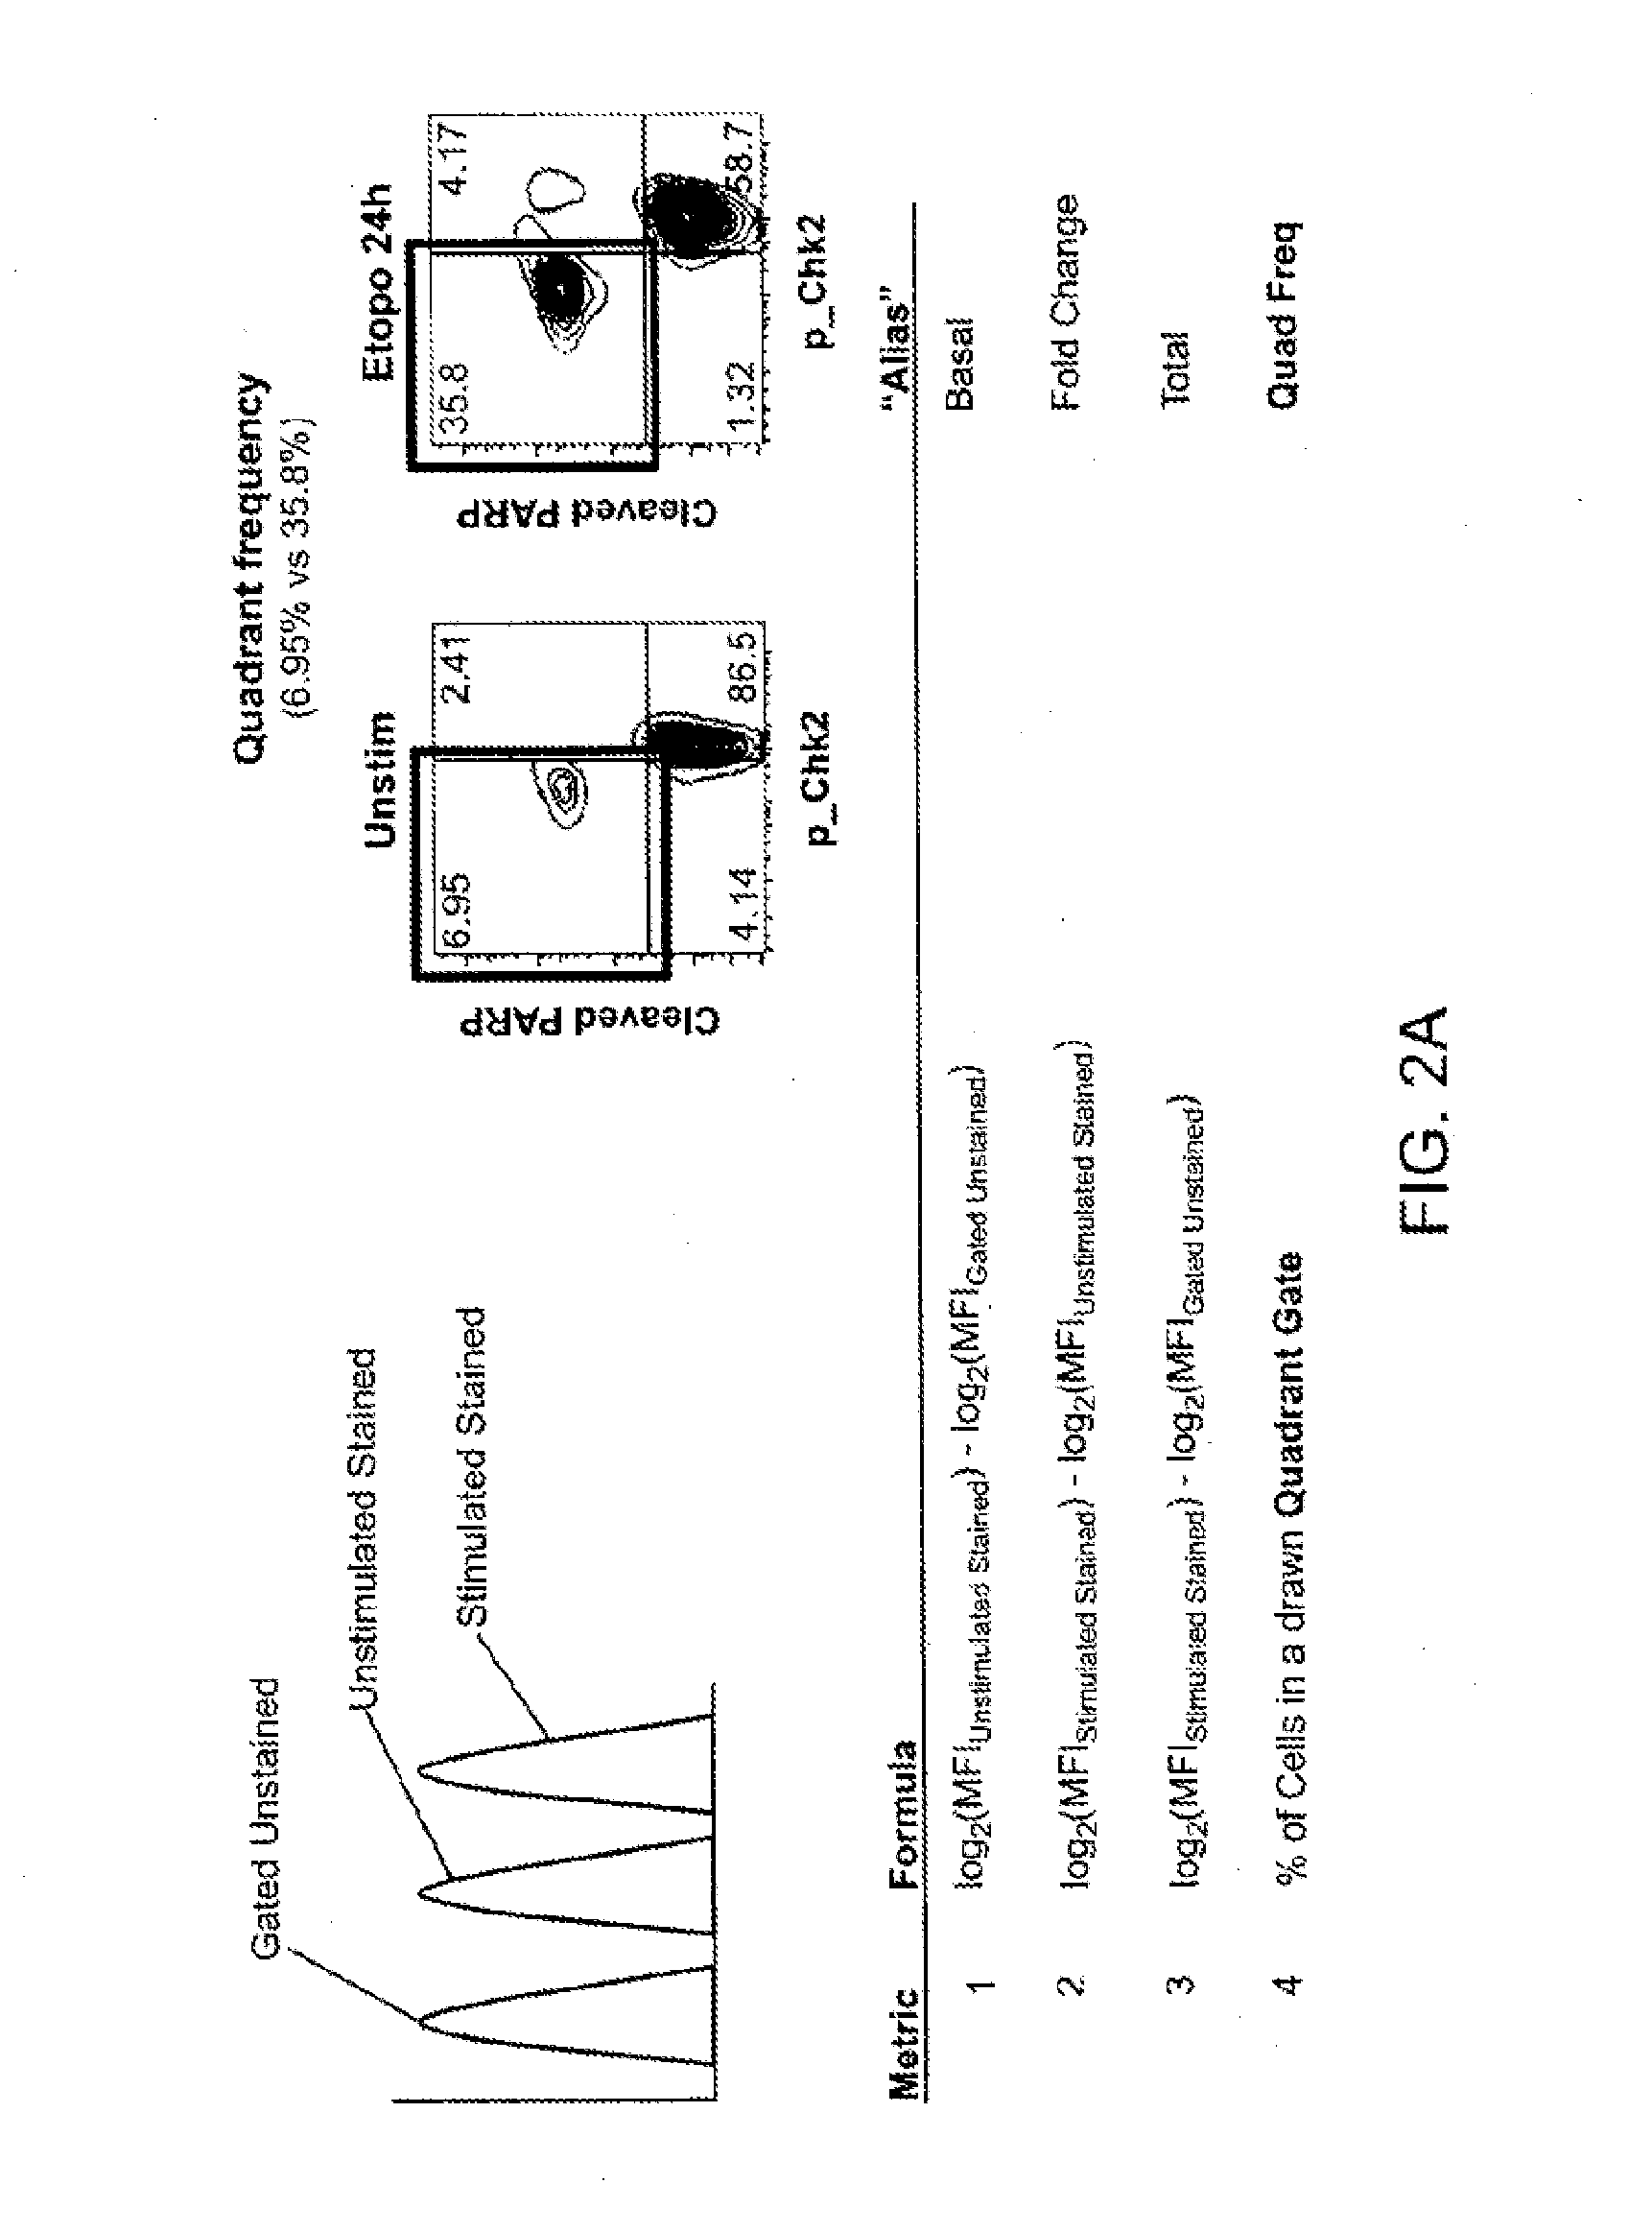 Methods for Diagnosis, Prognosis and Methods of Treatment